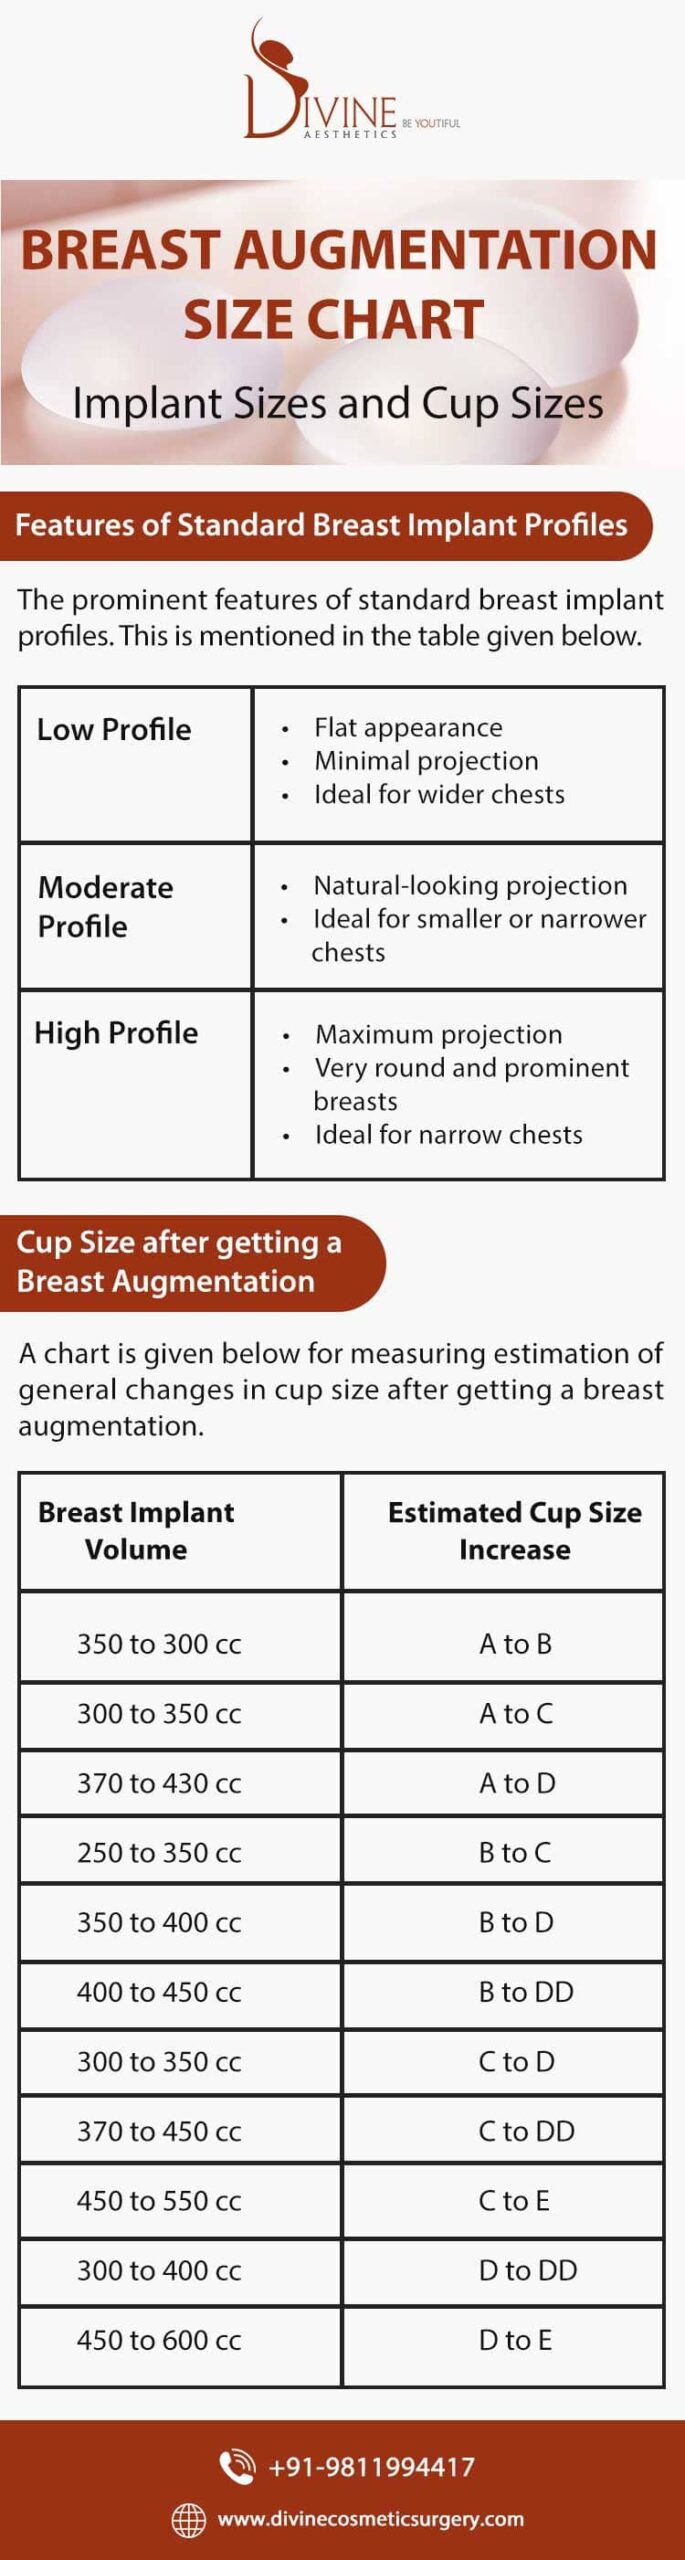 Natural DD/E. Lift with implants - what size and type of implant